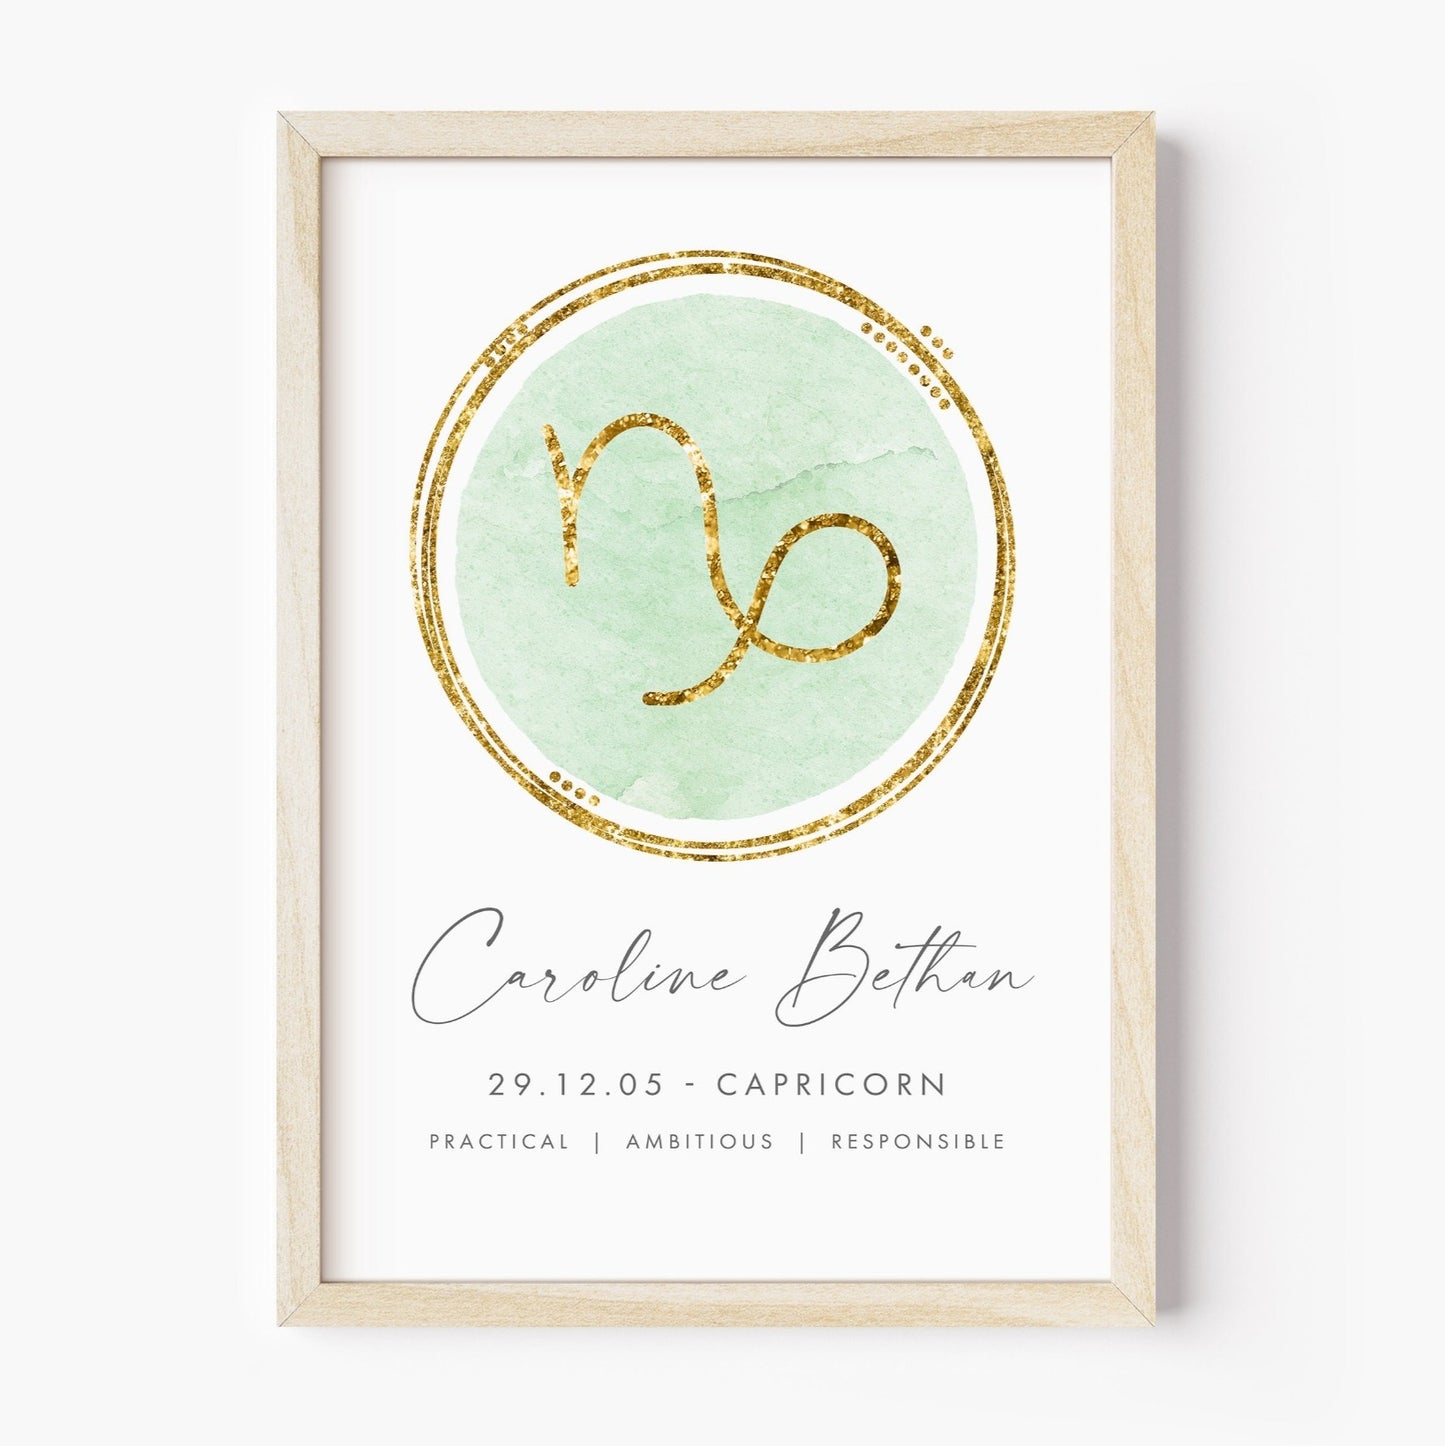 Capricorn Art Print Personalised, Zodiac Themed Gifts for Friend